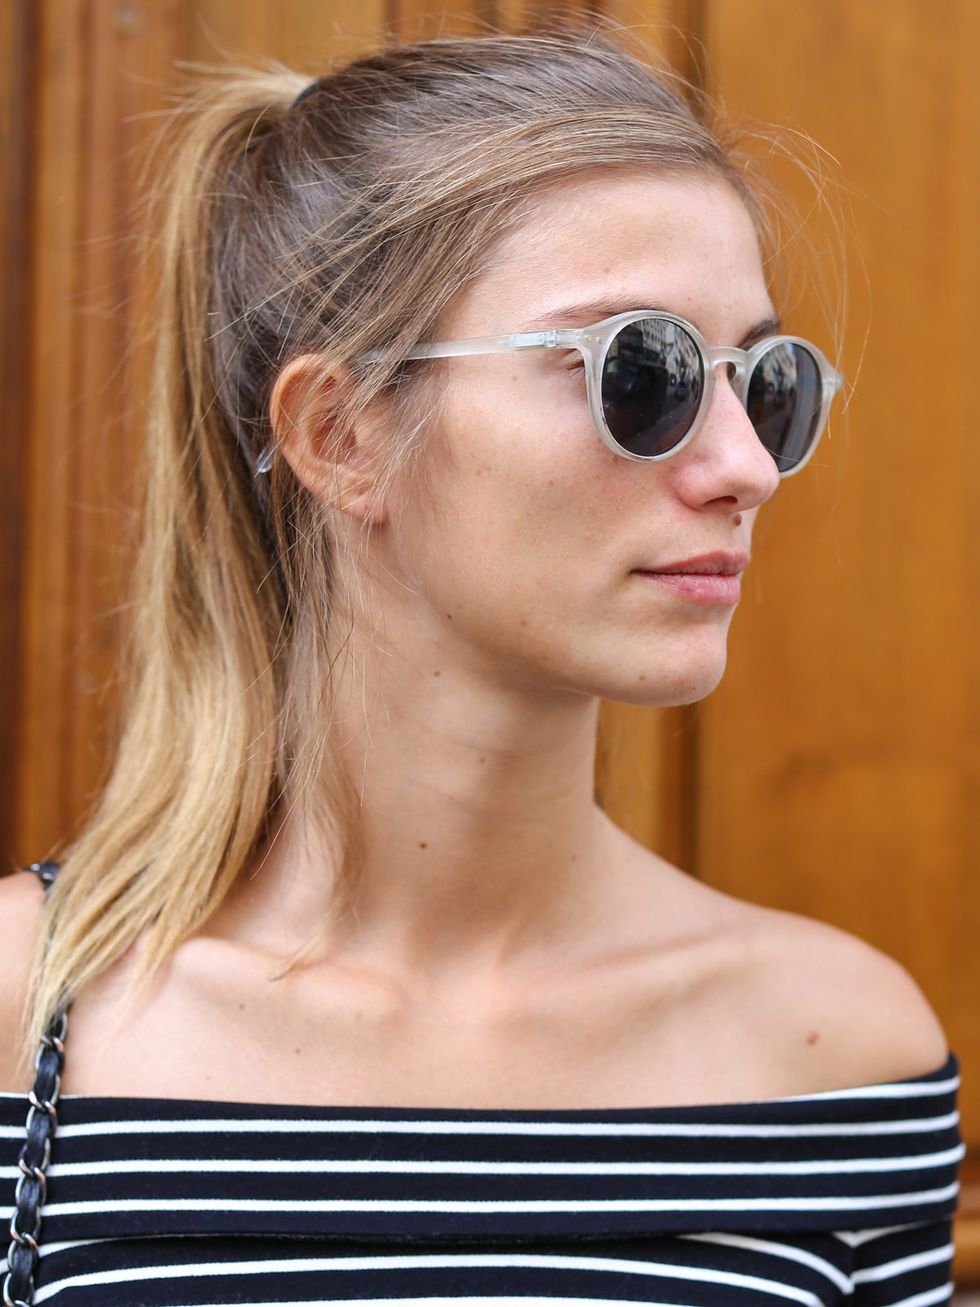 Eyewear, Hair, Sunglasses, Hairstyle, Glasses, Blond, Beauty, Cool, Shoulder, Chin, 